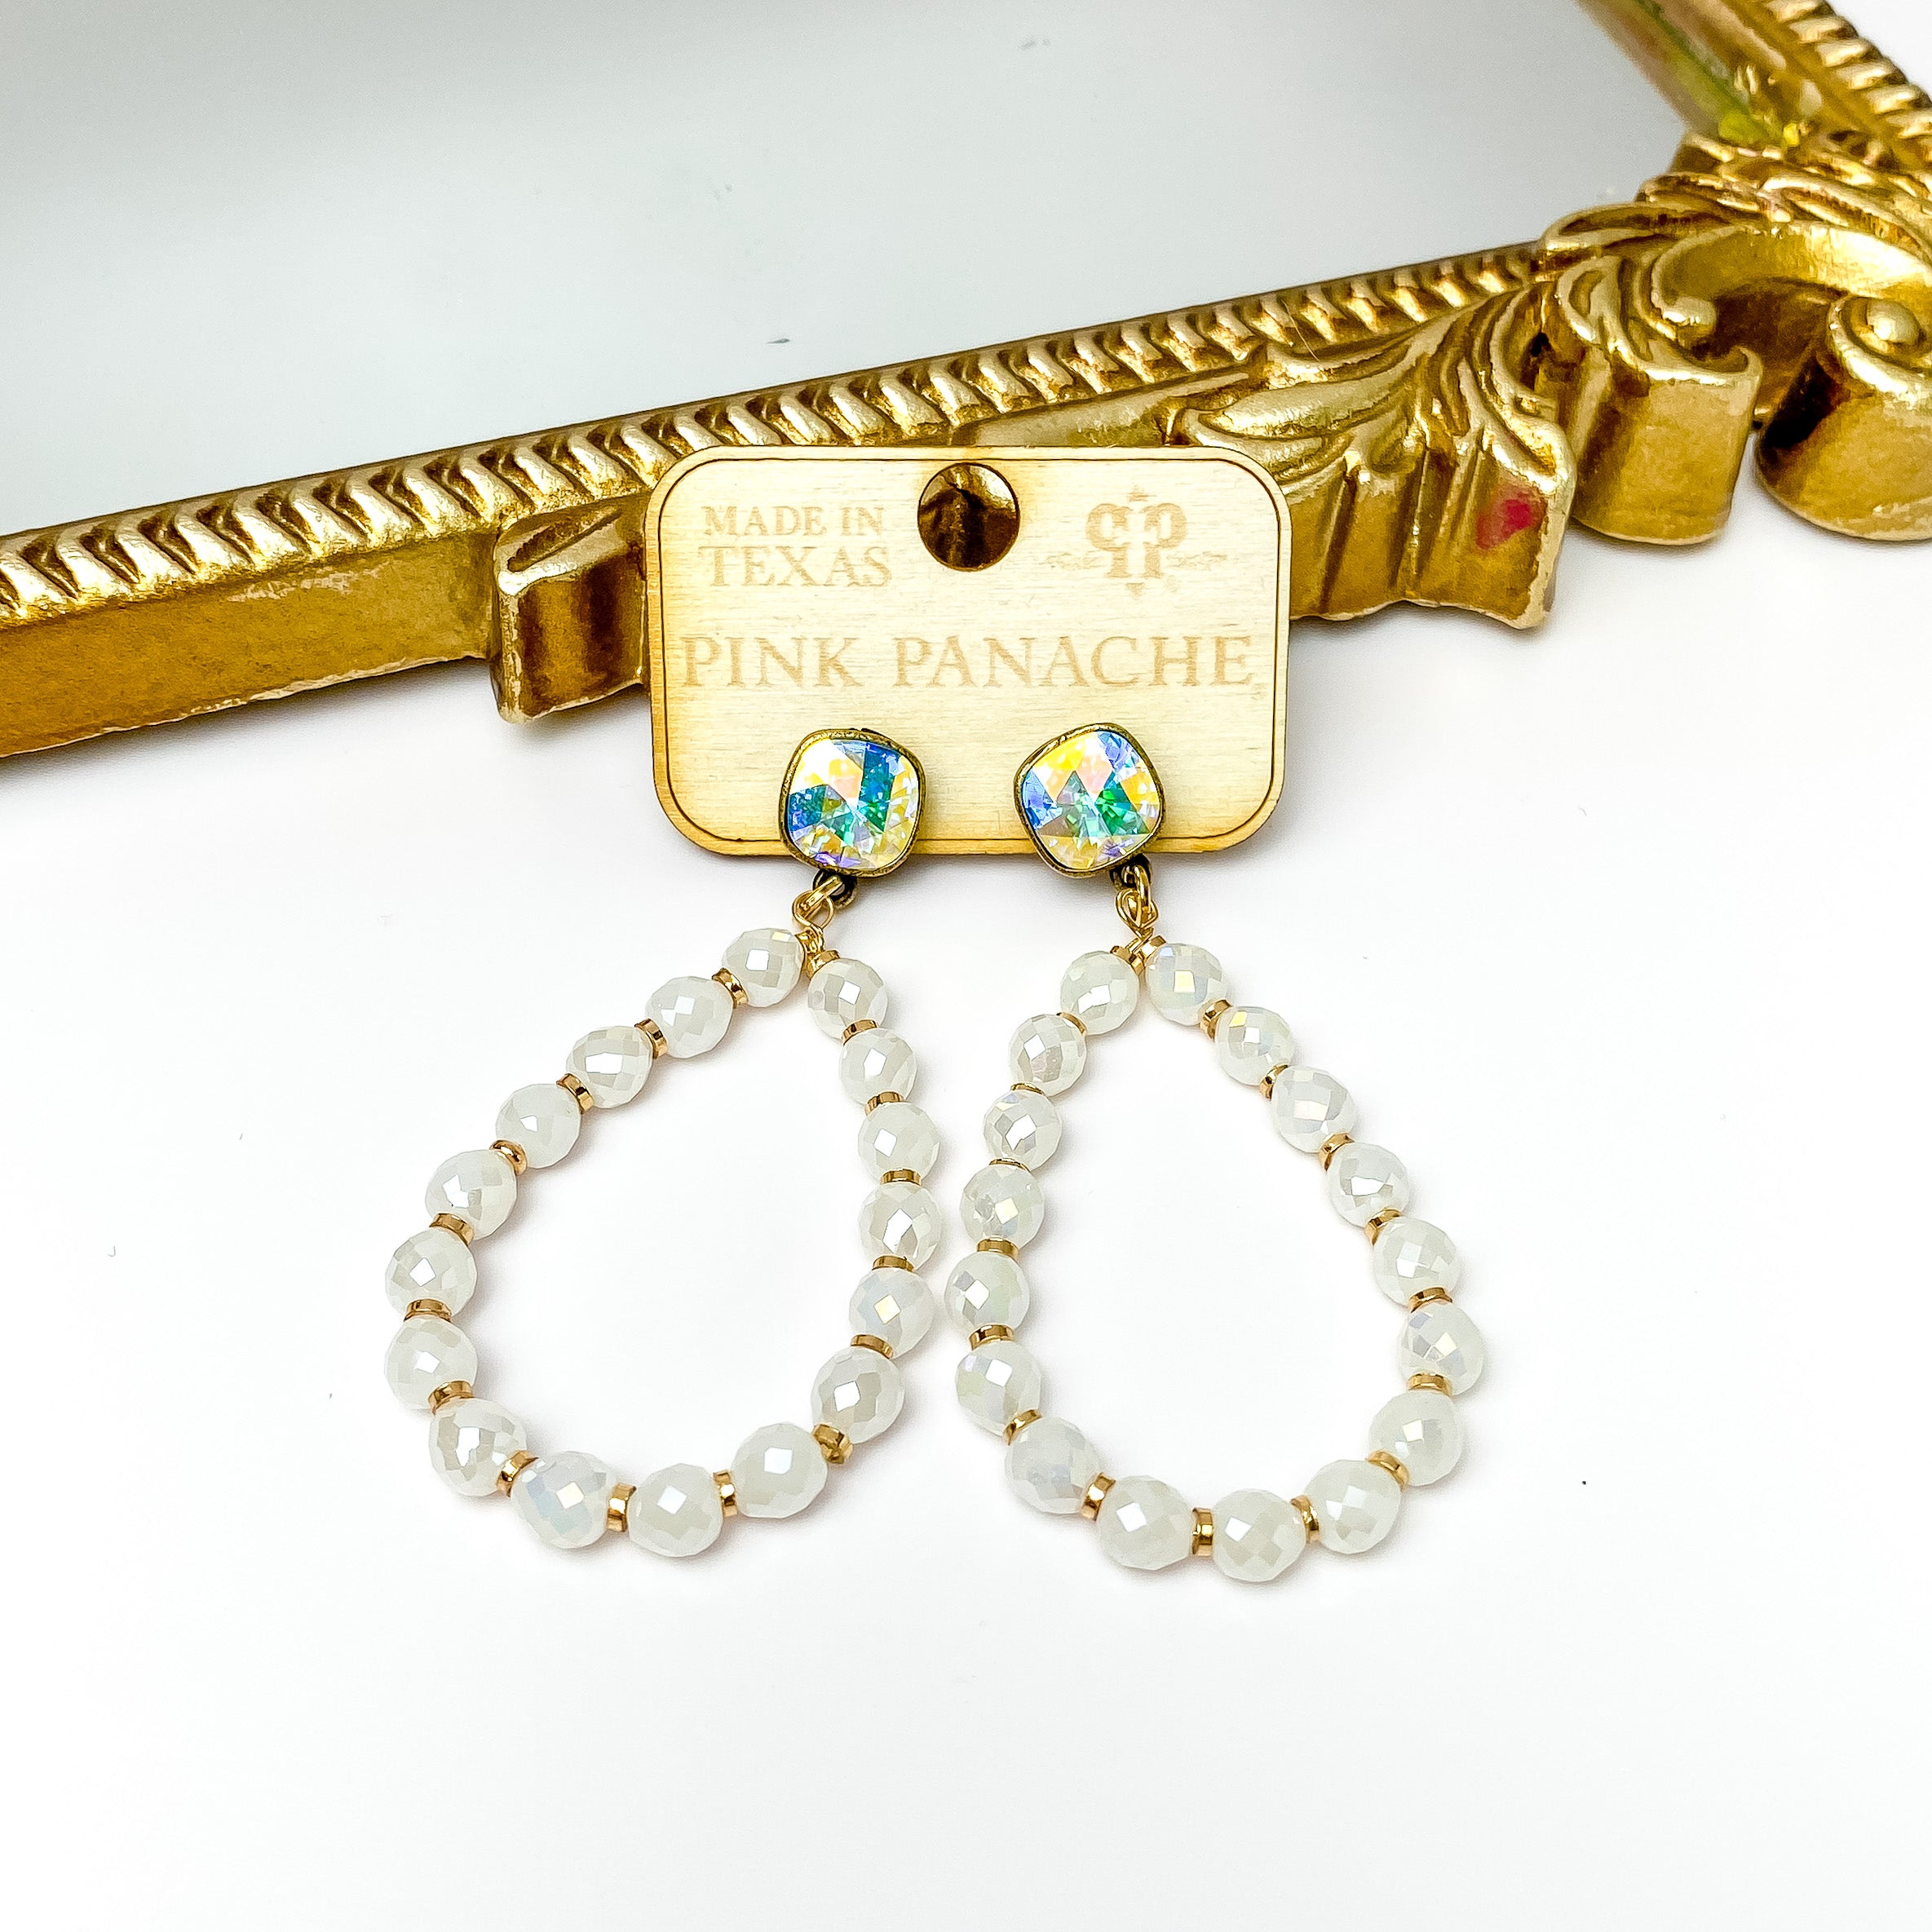 AB cushion cut post back earrings with a teardrop pendant. This pendant includes white crystal beads ith small gold spacers. These earrings are pictured on a wood earrings holder in front of a gold mirror on a white background. 